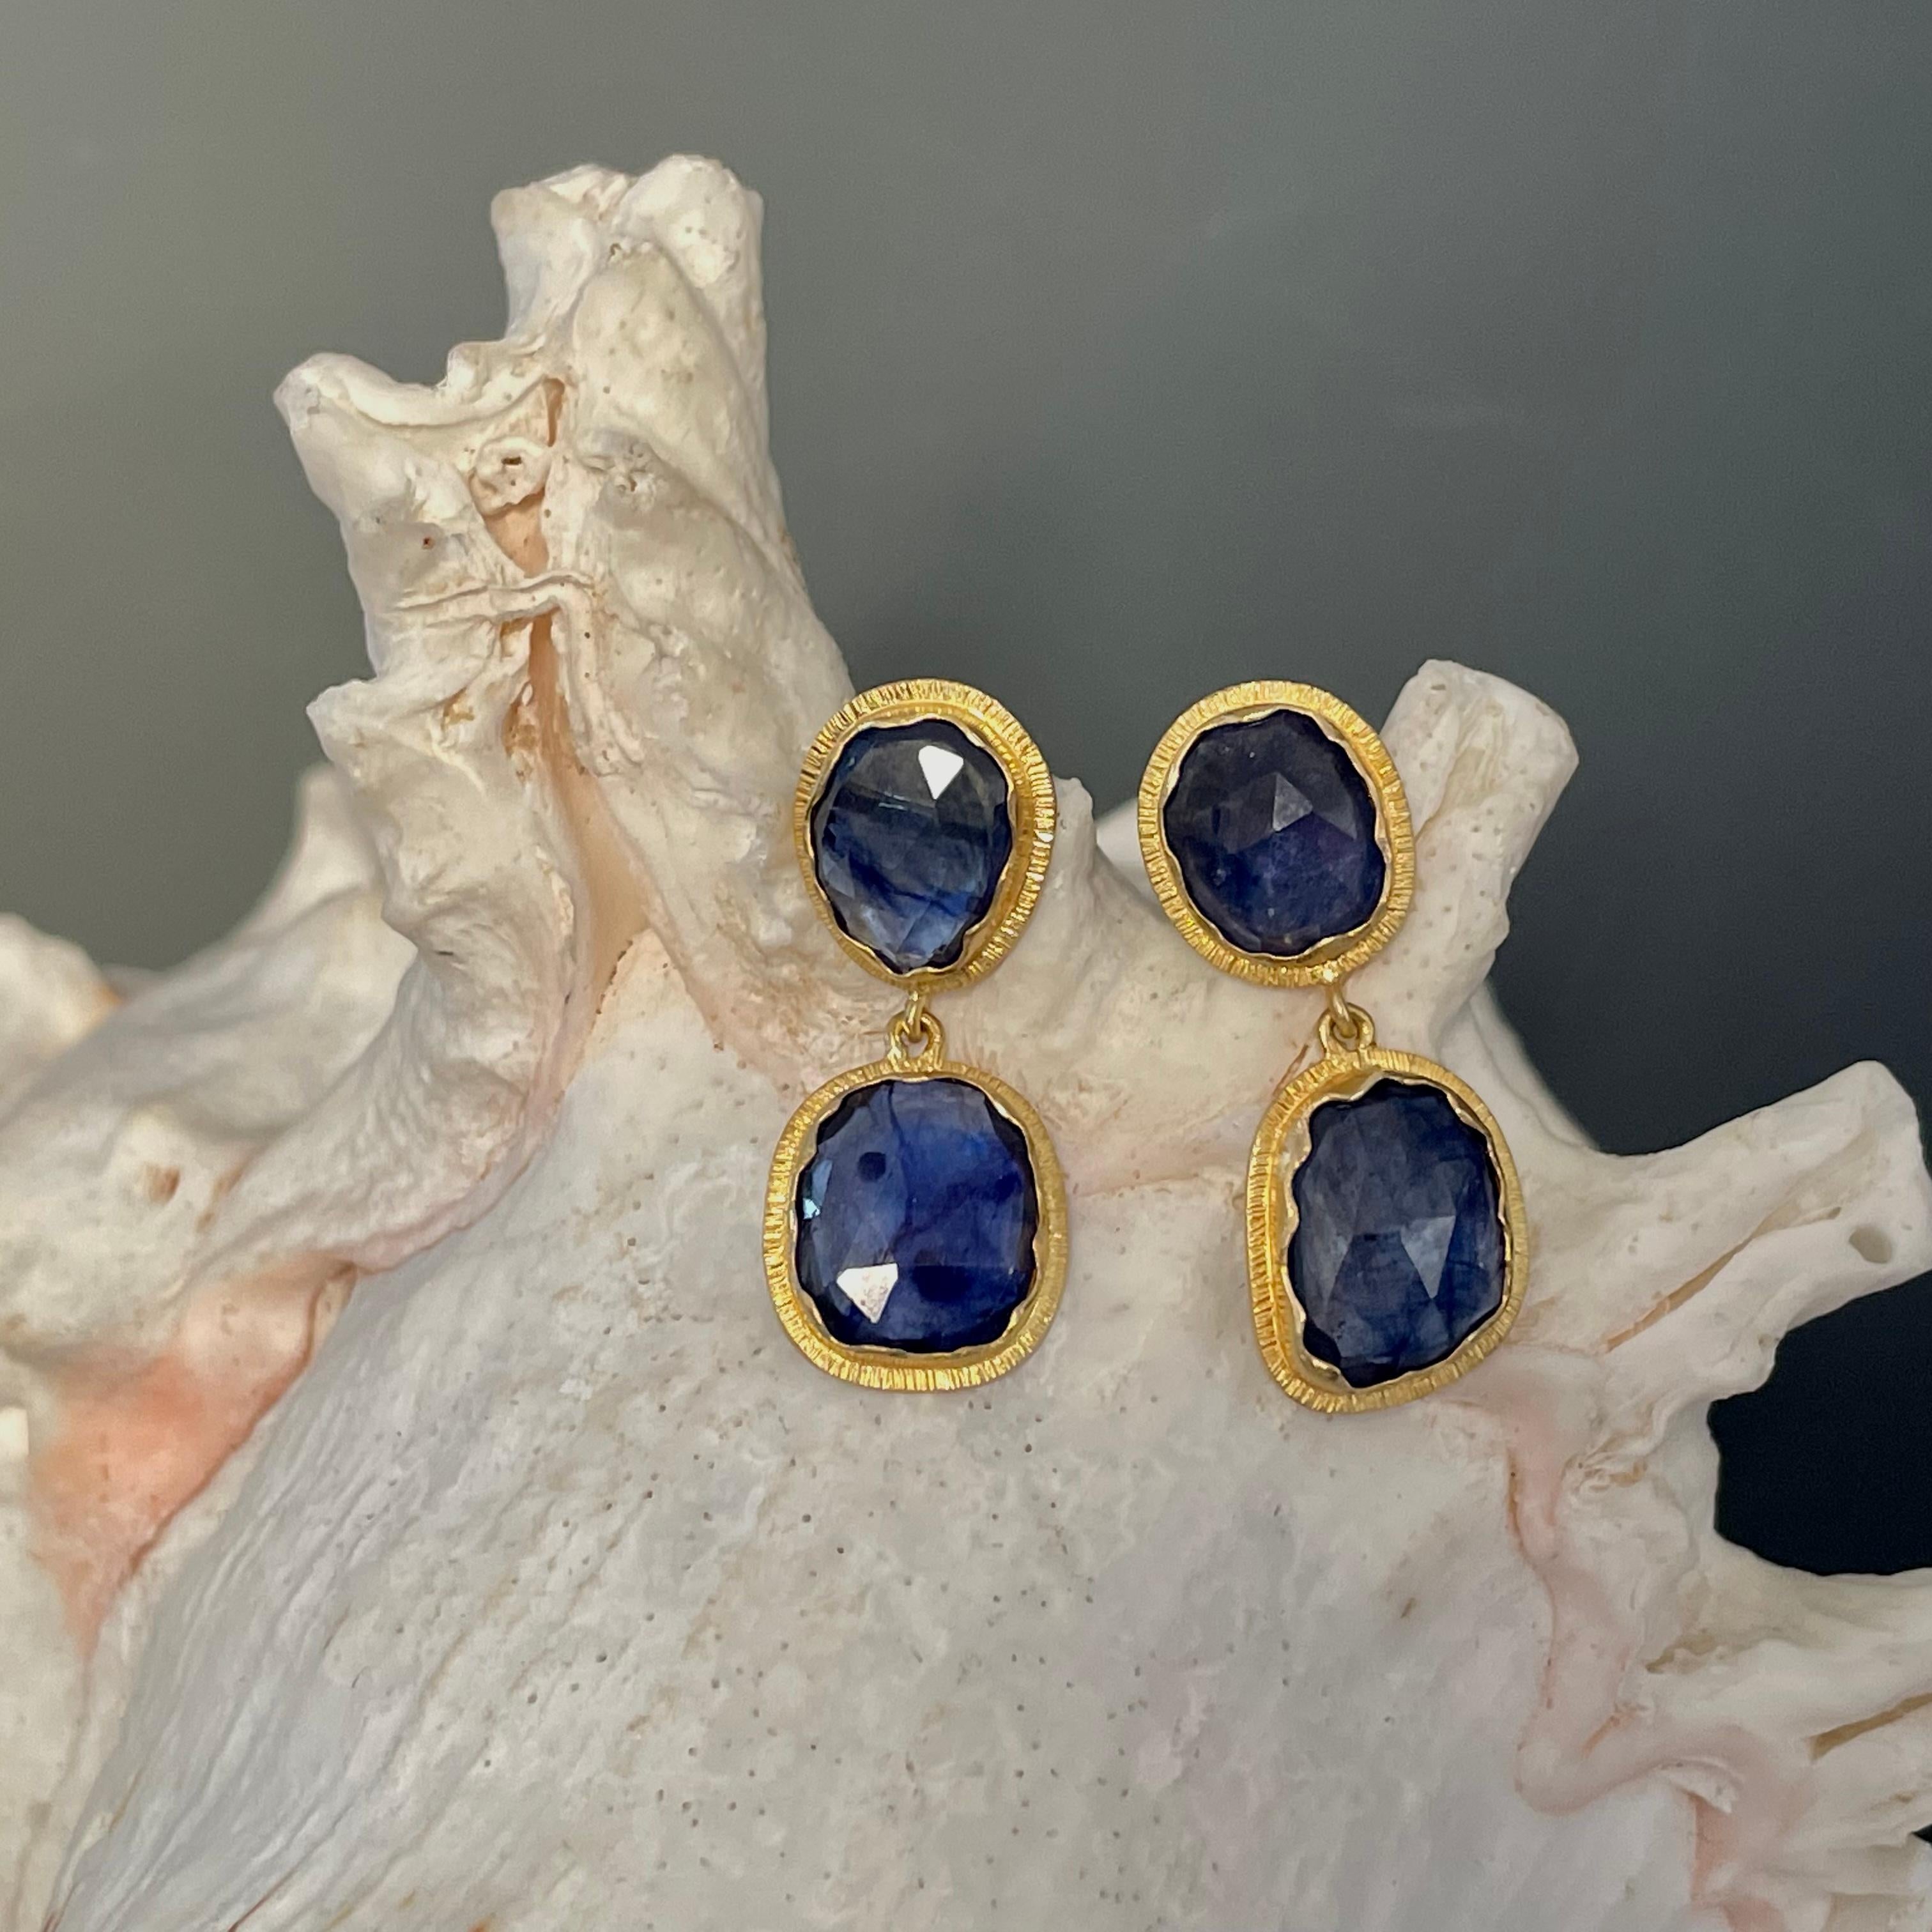 Four slightly mix-shaped rose cut blue sapphires, approximately 7 x 9 mm to 8 x 10 mm in size, are set in organic wavy bezels with line texture accents in this interesting and attractive design. These are sure to please!